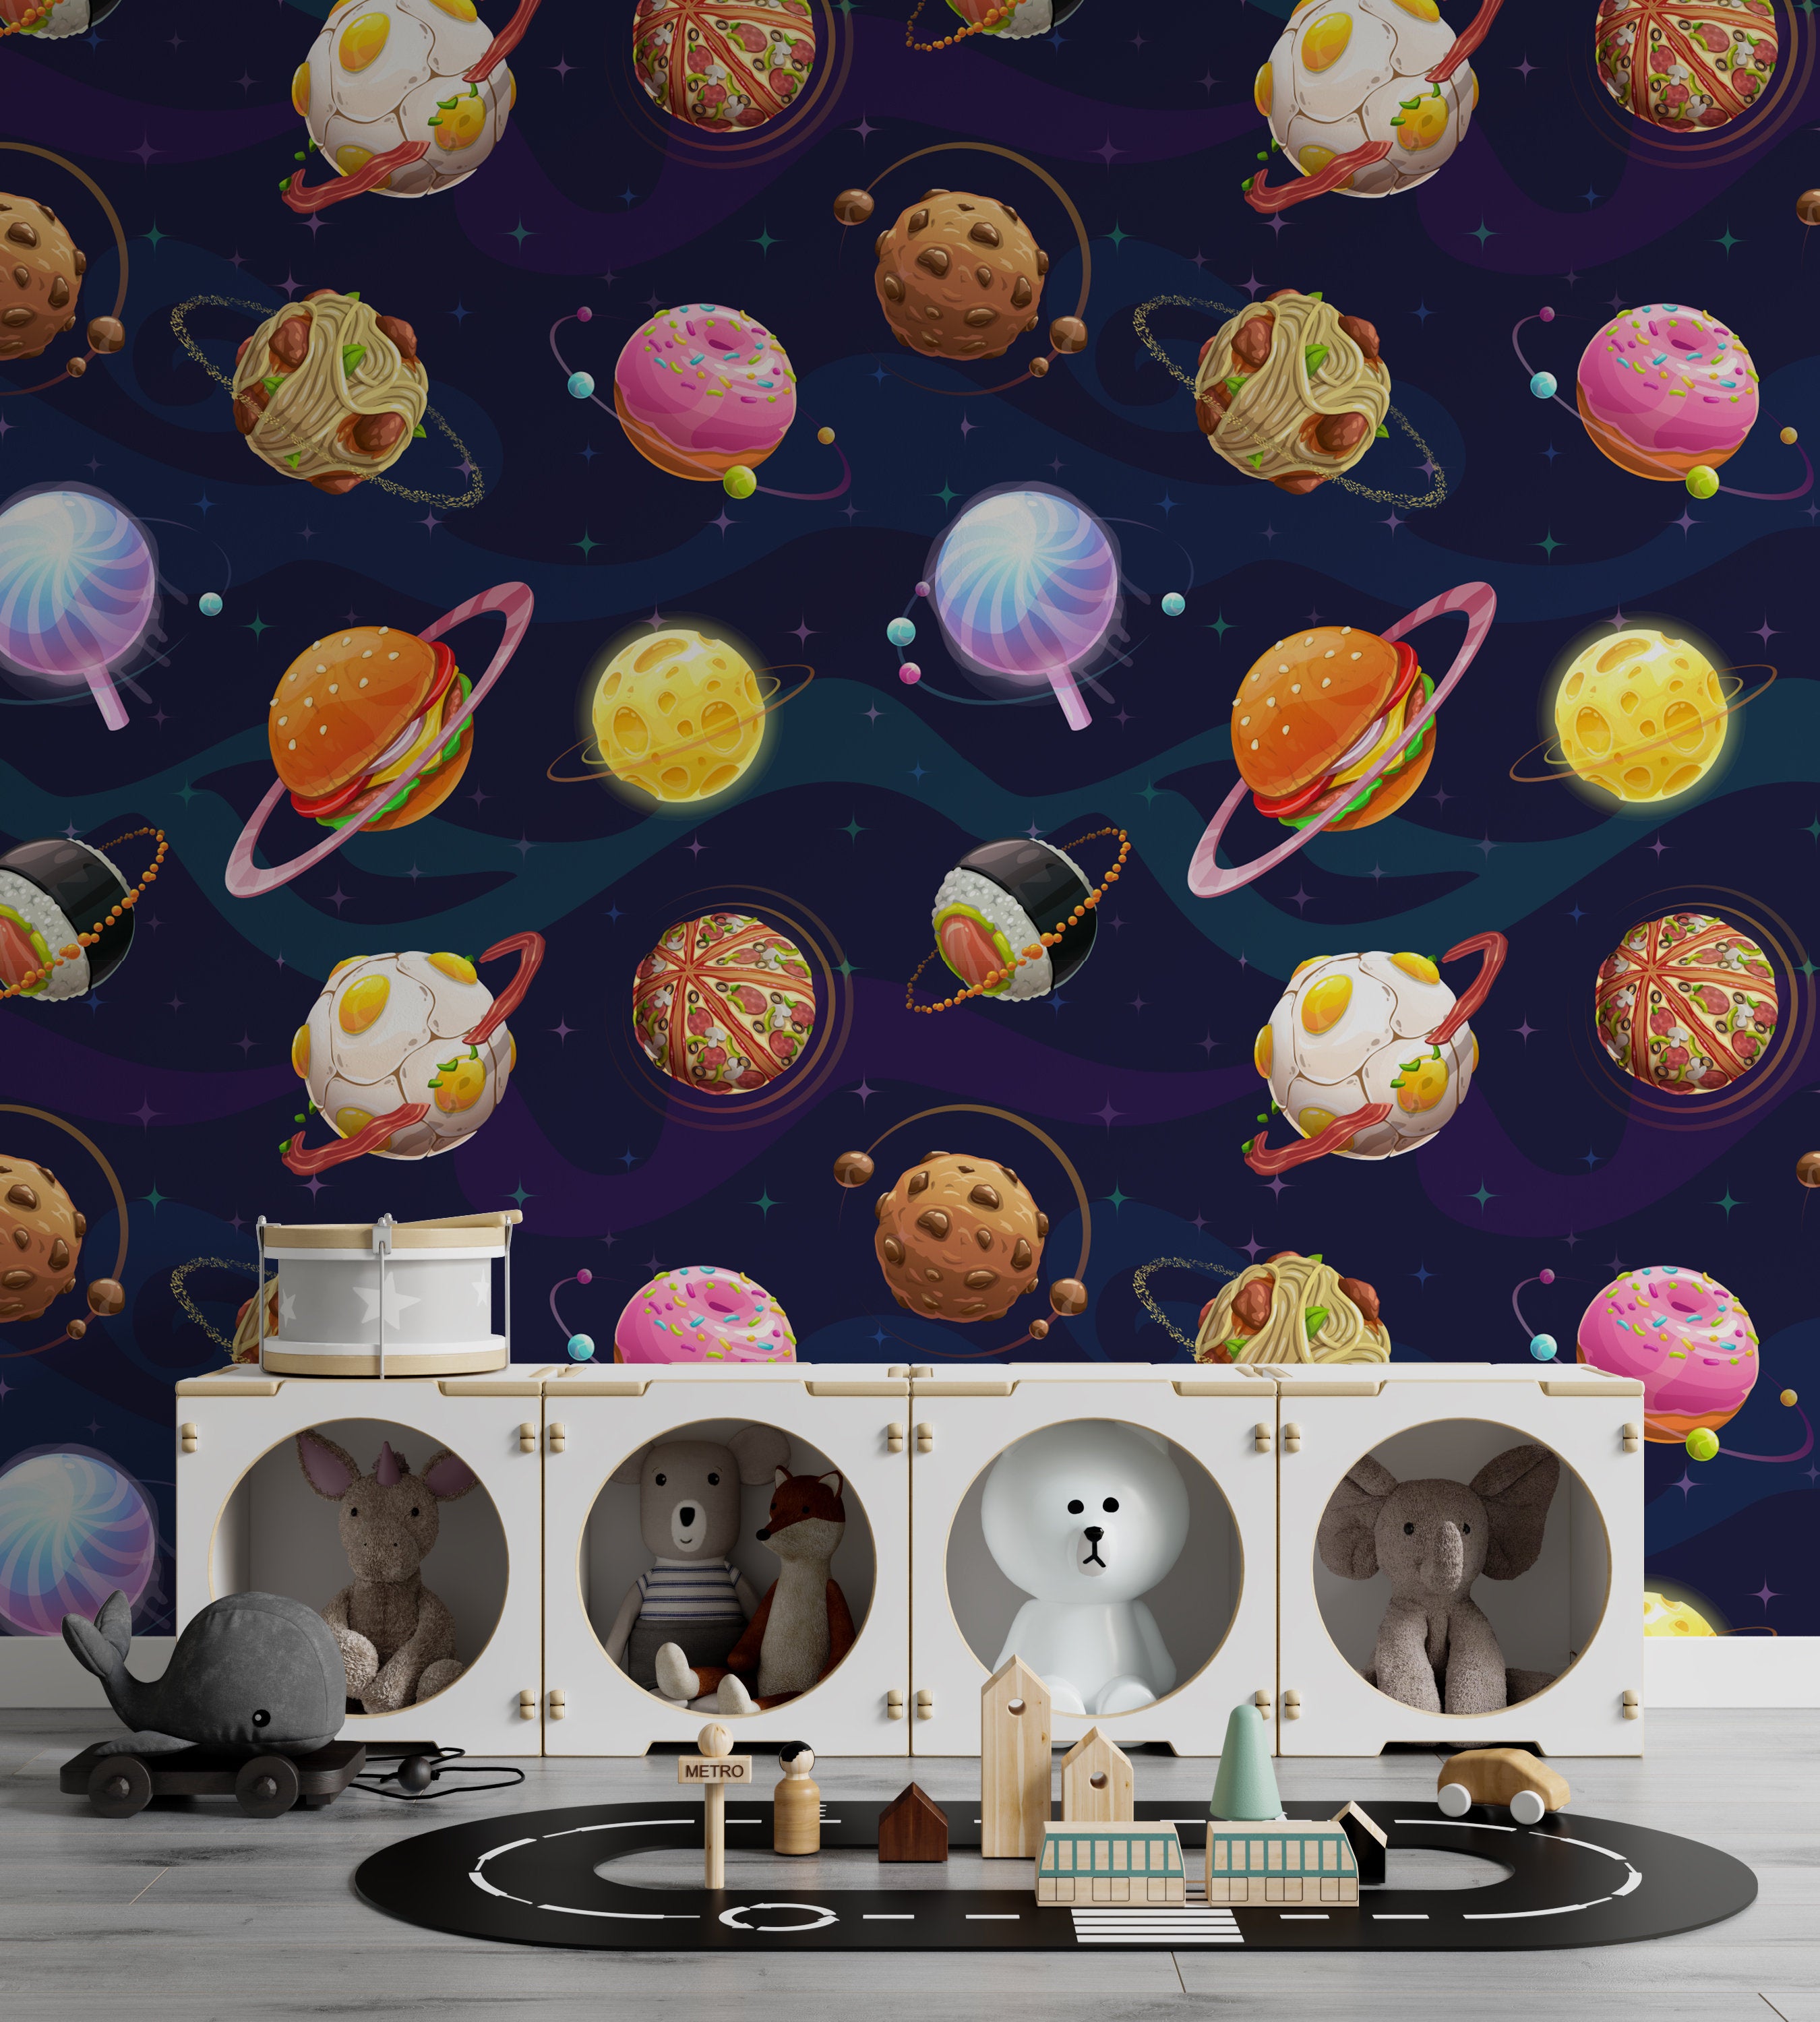 Cartoon Fantasy Food Planets Space Themed Funny Solar System Wallpaper Self Adhesive Peel and Stick Wall Decoration Scandinavian Removable